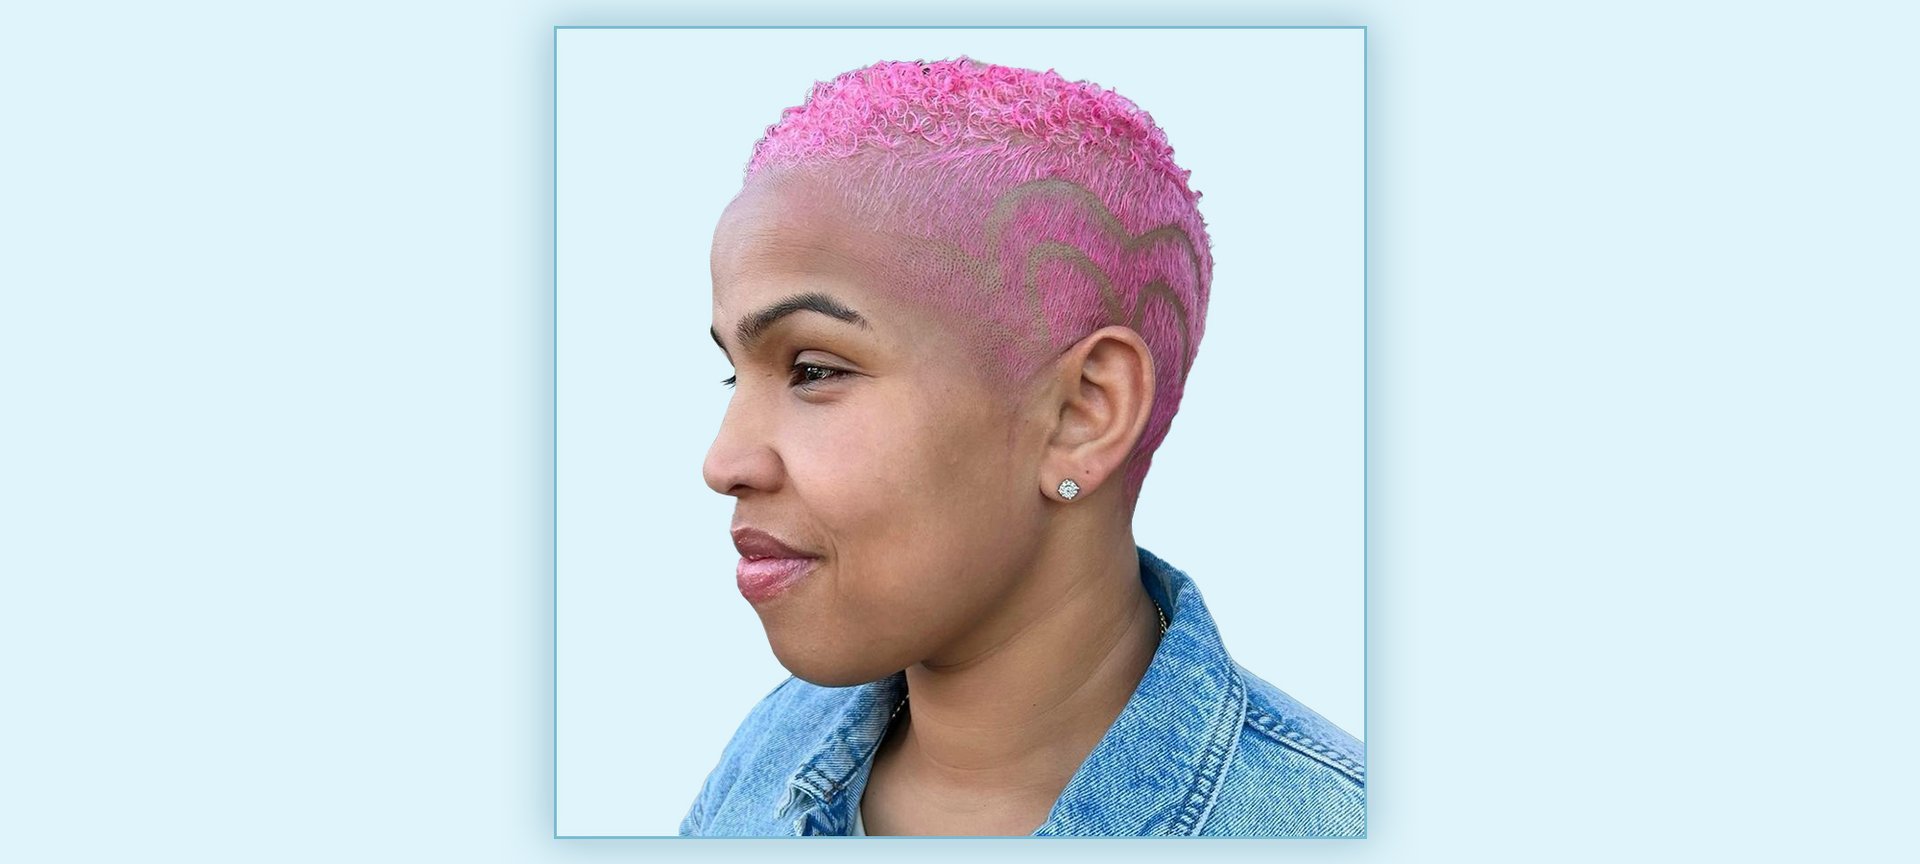 https://www.lorealparisusa.com/-/media/project/loreal/brand-sites/oap/americas/us/beauty-magazine/2023/10-october/10-11/high-fade-vs-low-fade/a-side-profile-of-a-person-with-pink-dyed-low-fade-hair.jpg?rev=096b454b027e45a0a5c9239fdd9b8d45